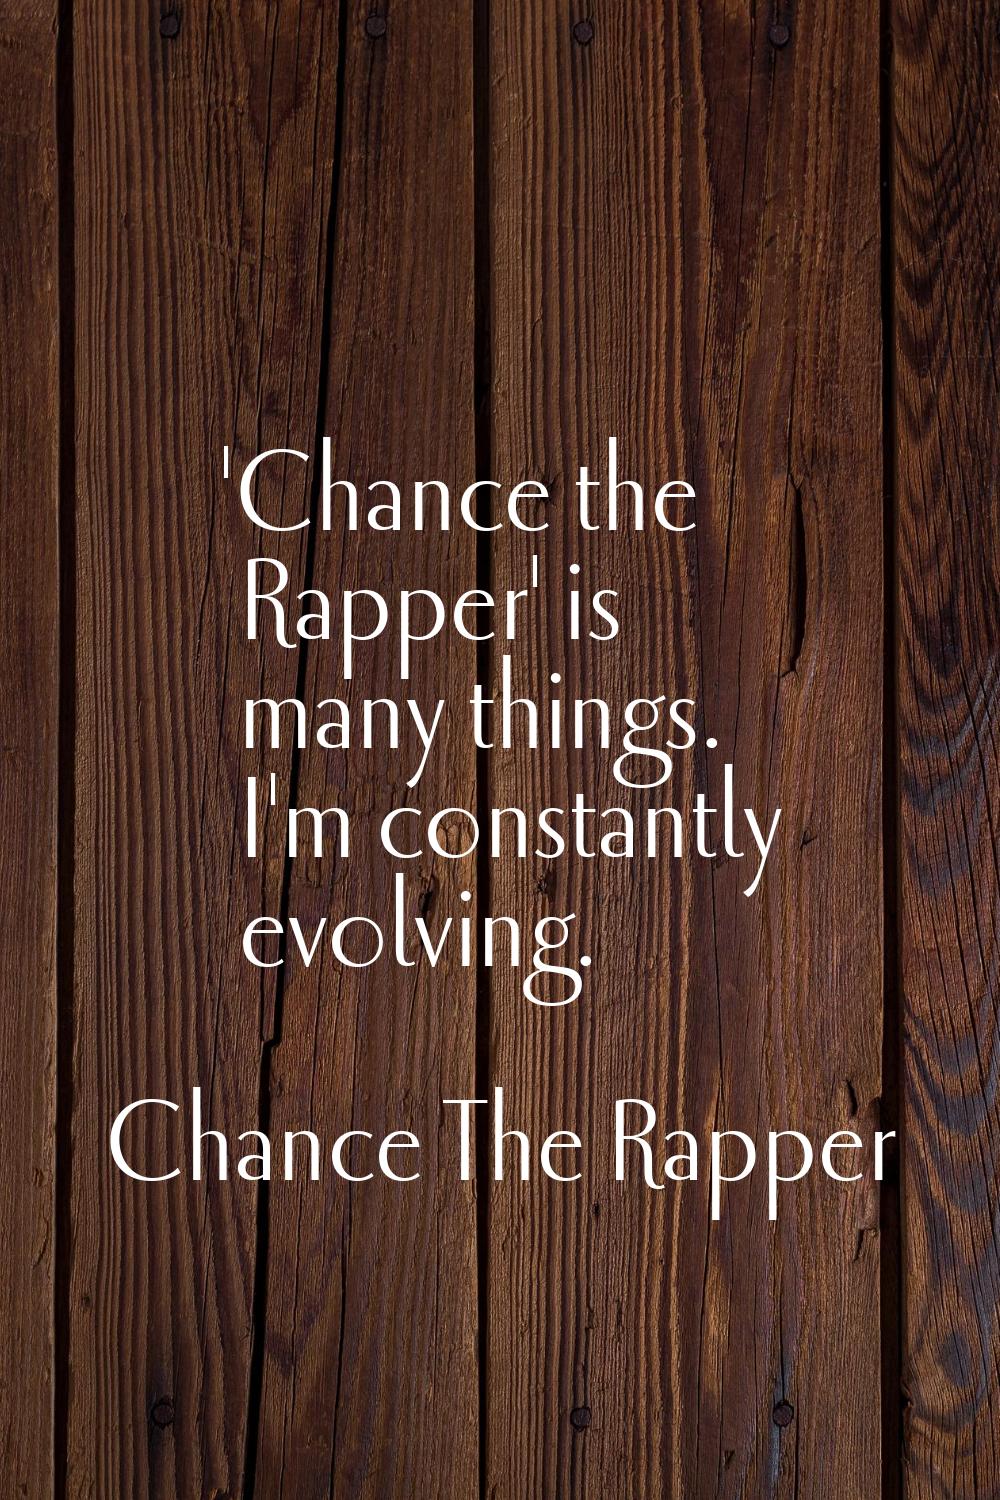 'Chance the Rapper' is many things. I'm constantly evolving.